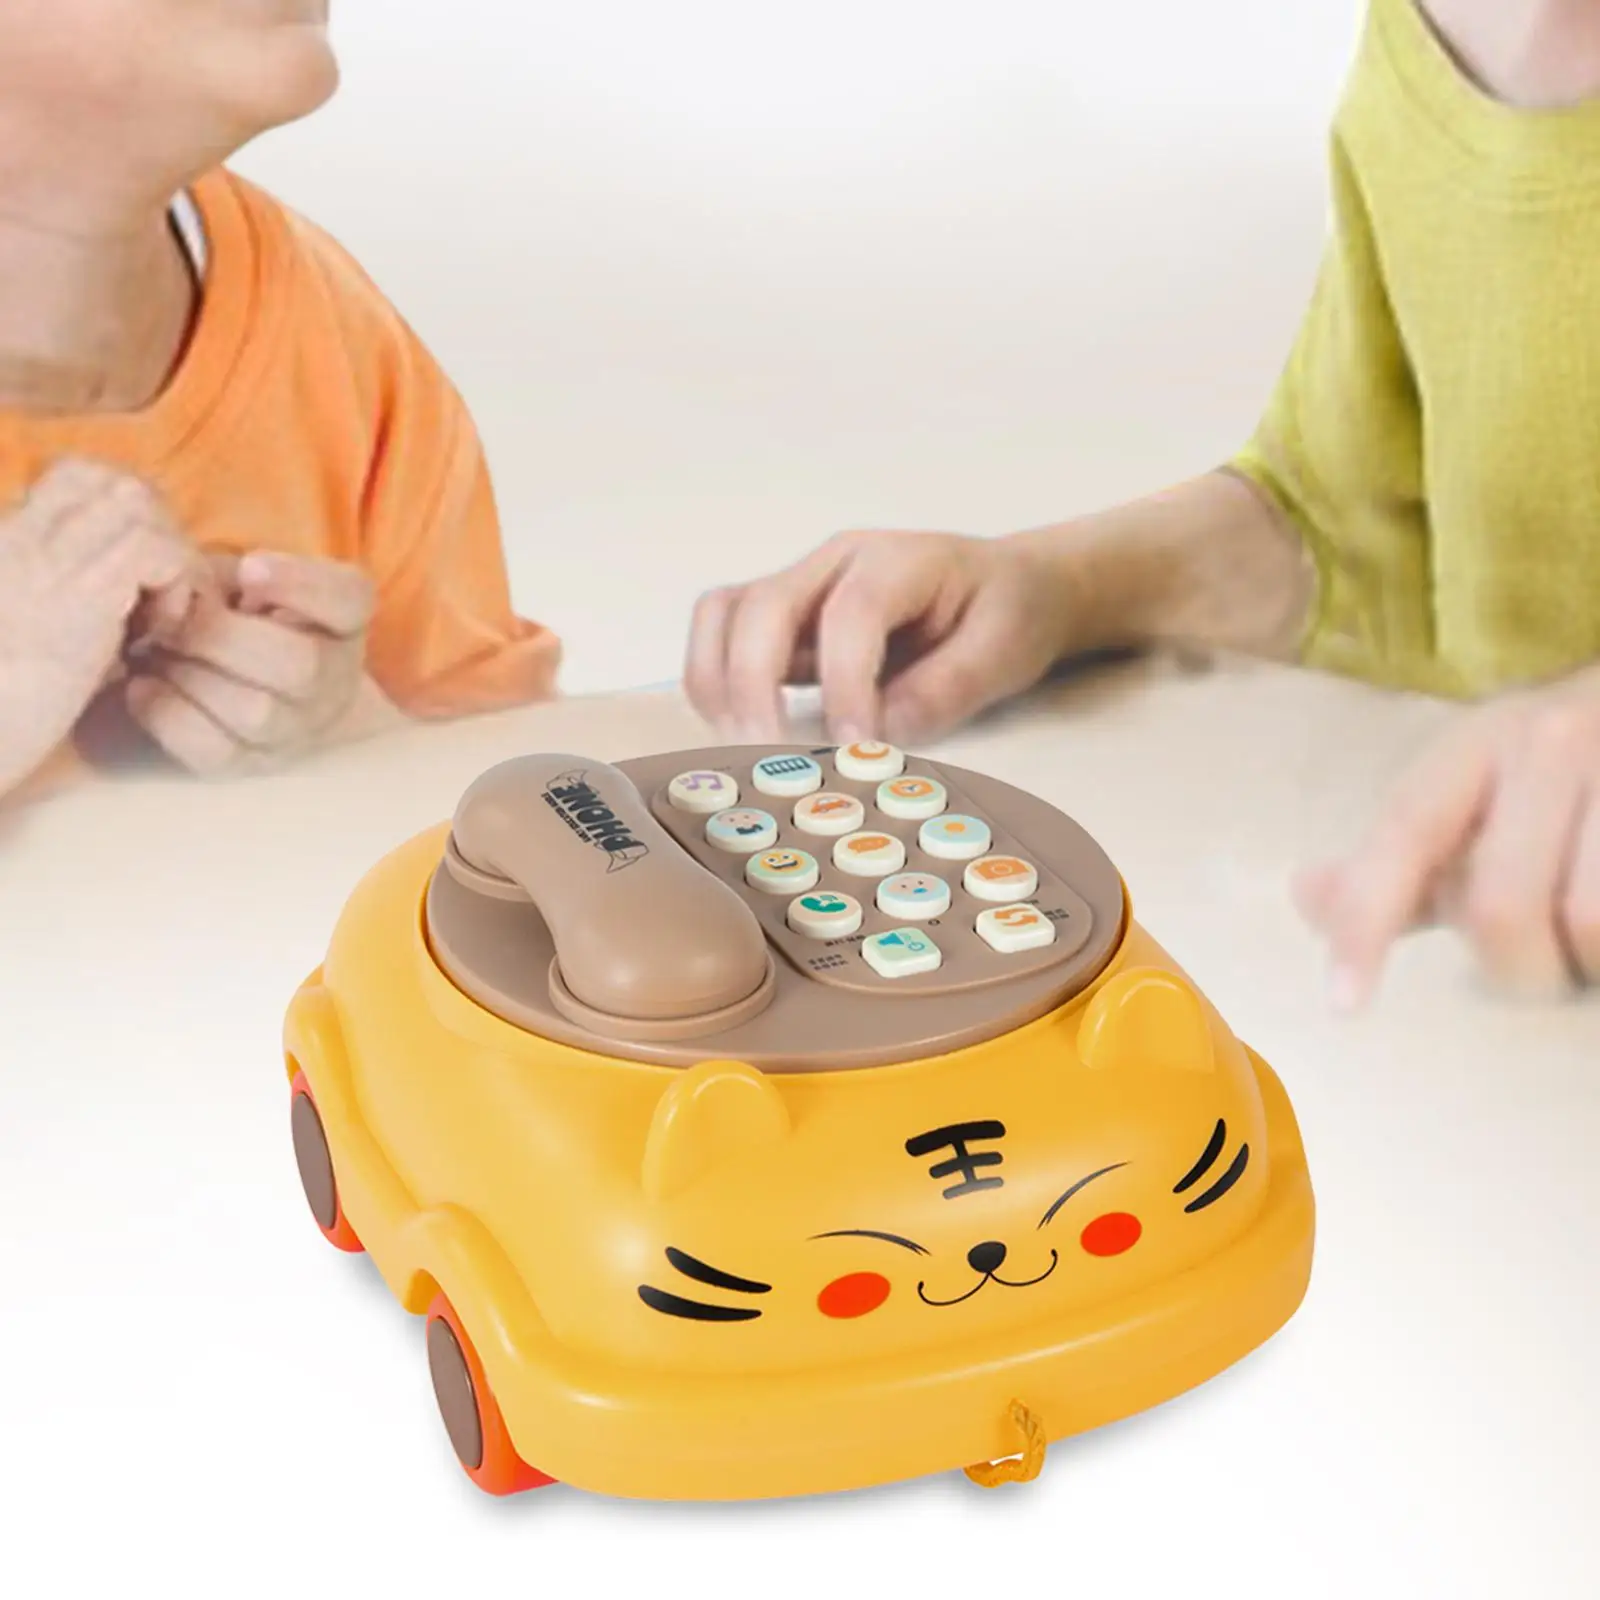 Sensory Toy Montessori Early Learning Toy Phone for Early Education Gift Creative Gift Preschool Educational Learning